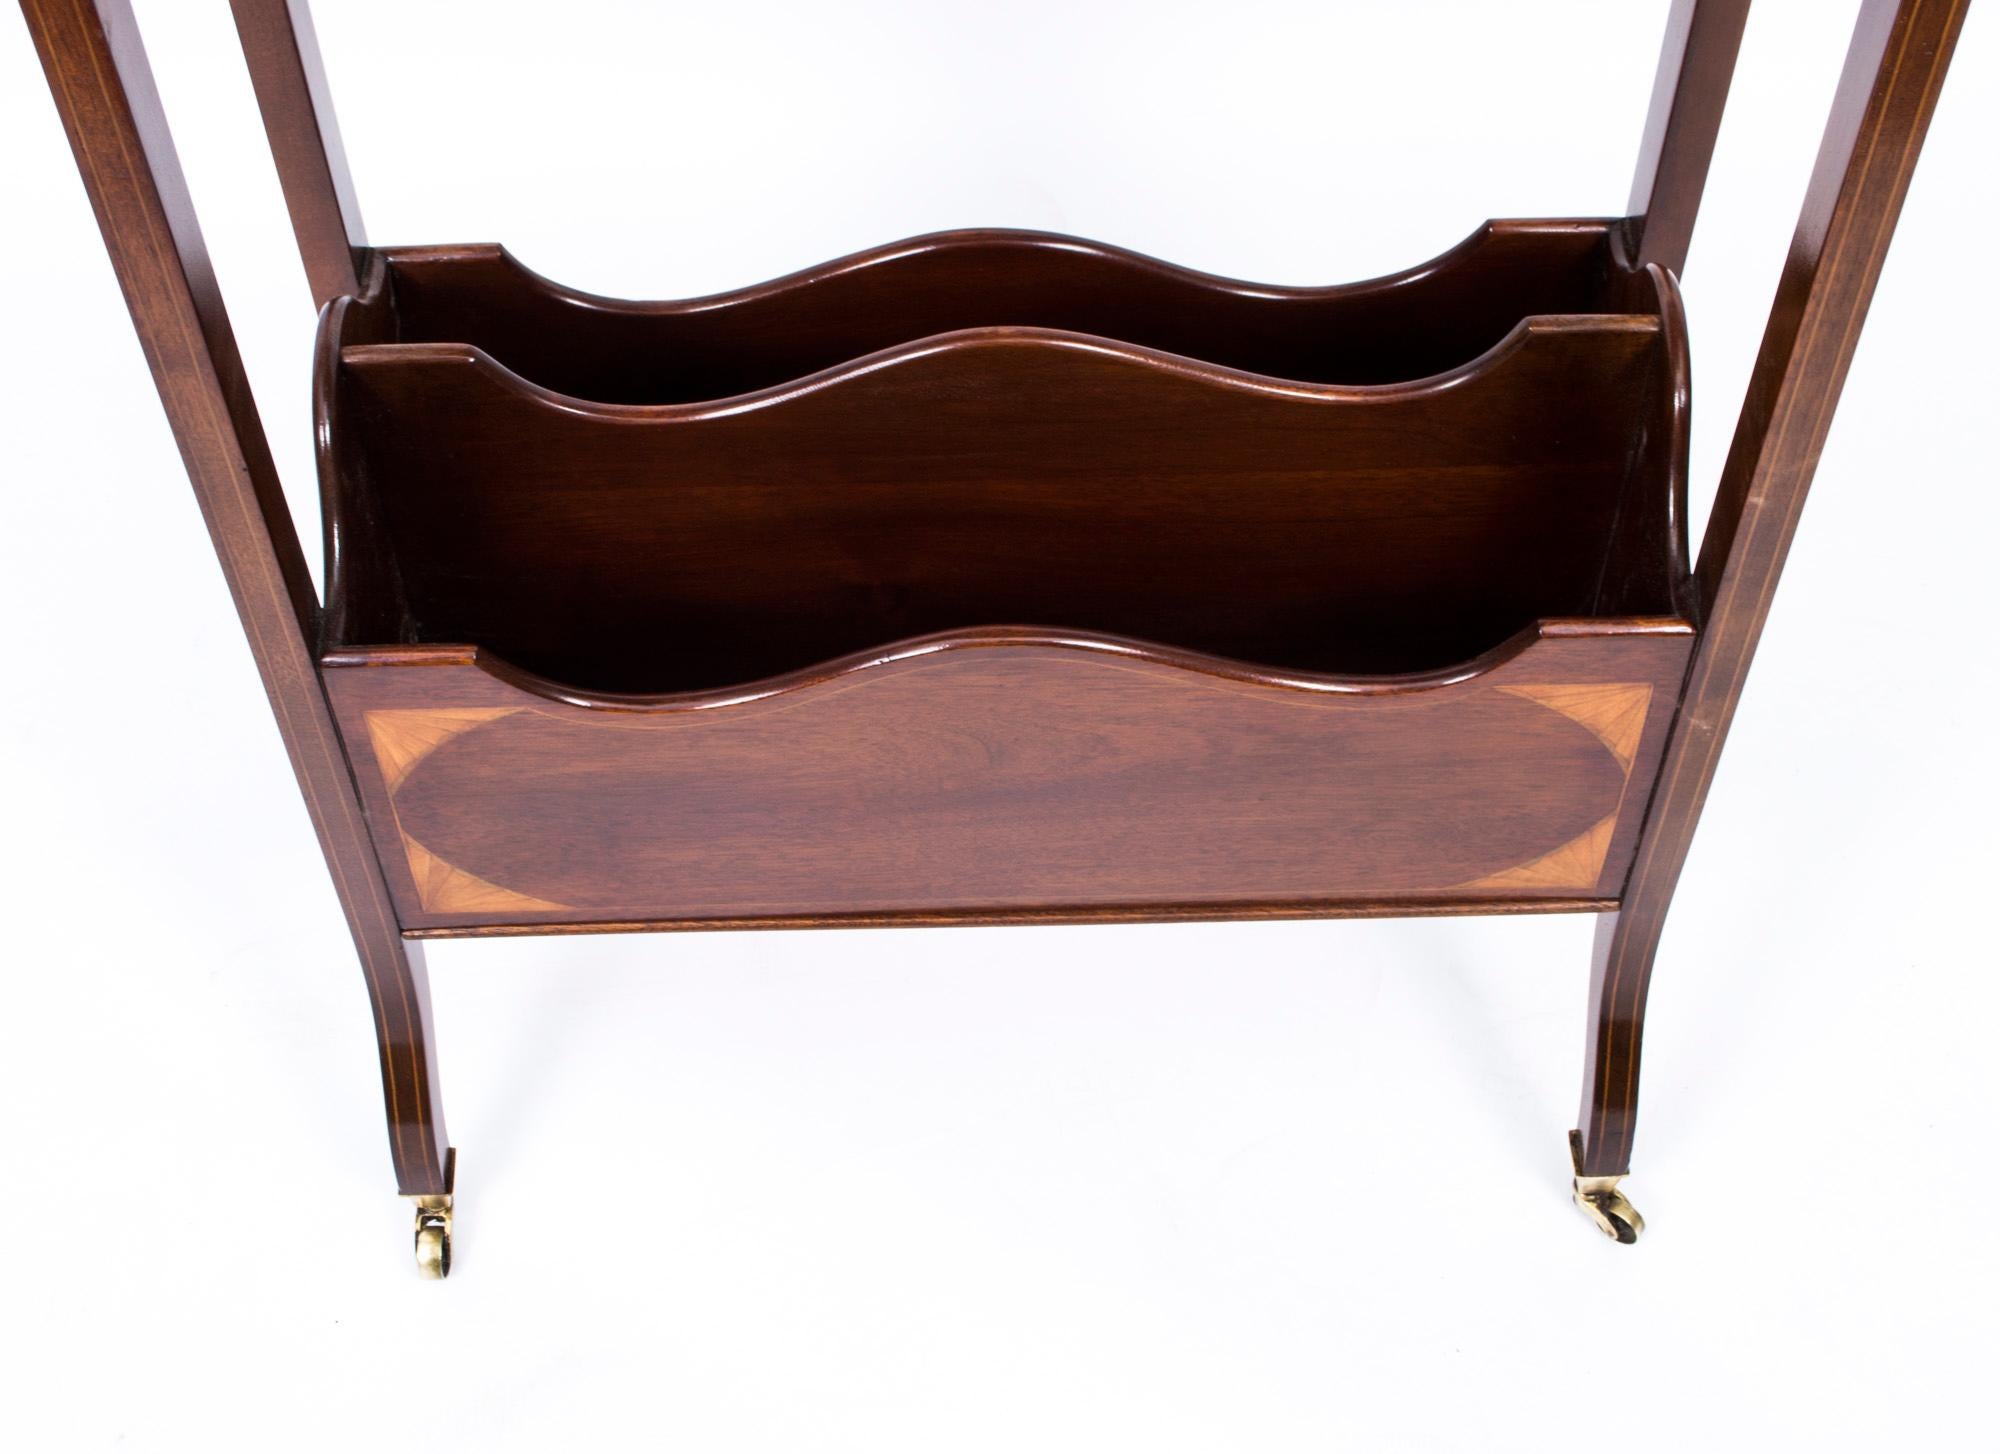 Boxwood Early 20th Century Edwardian Inlaid Mahogany Bookstand For Sale